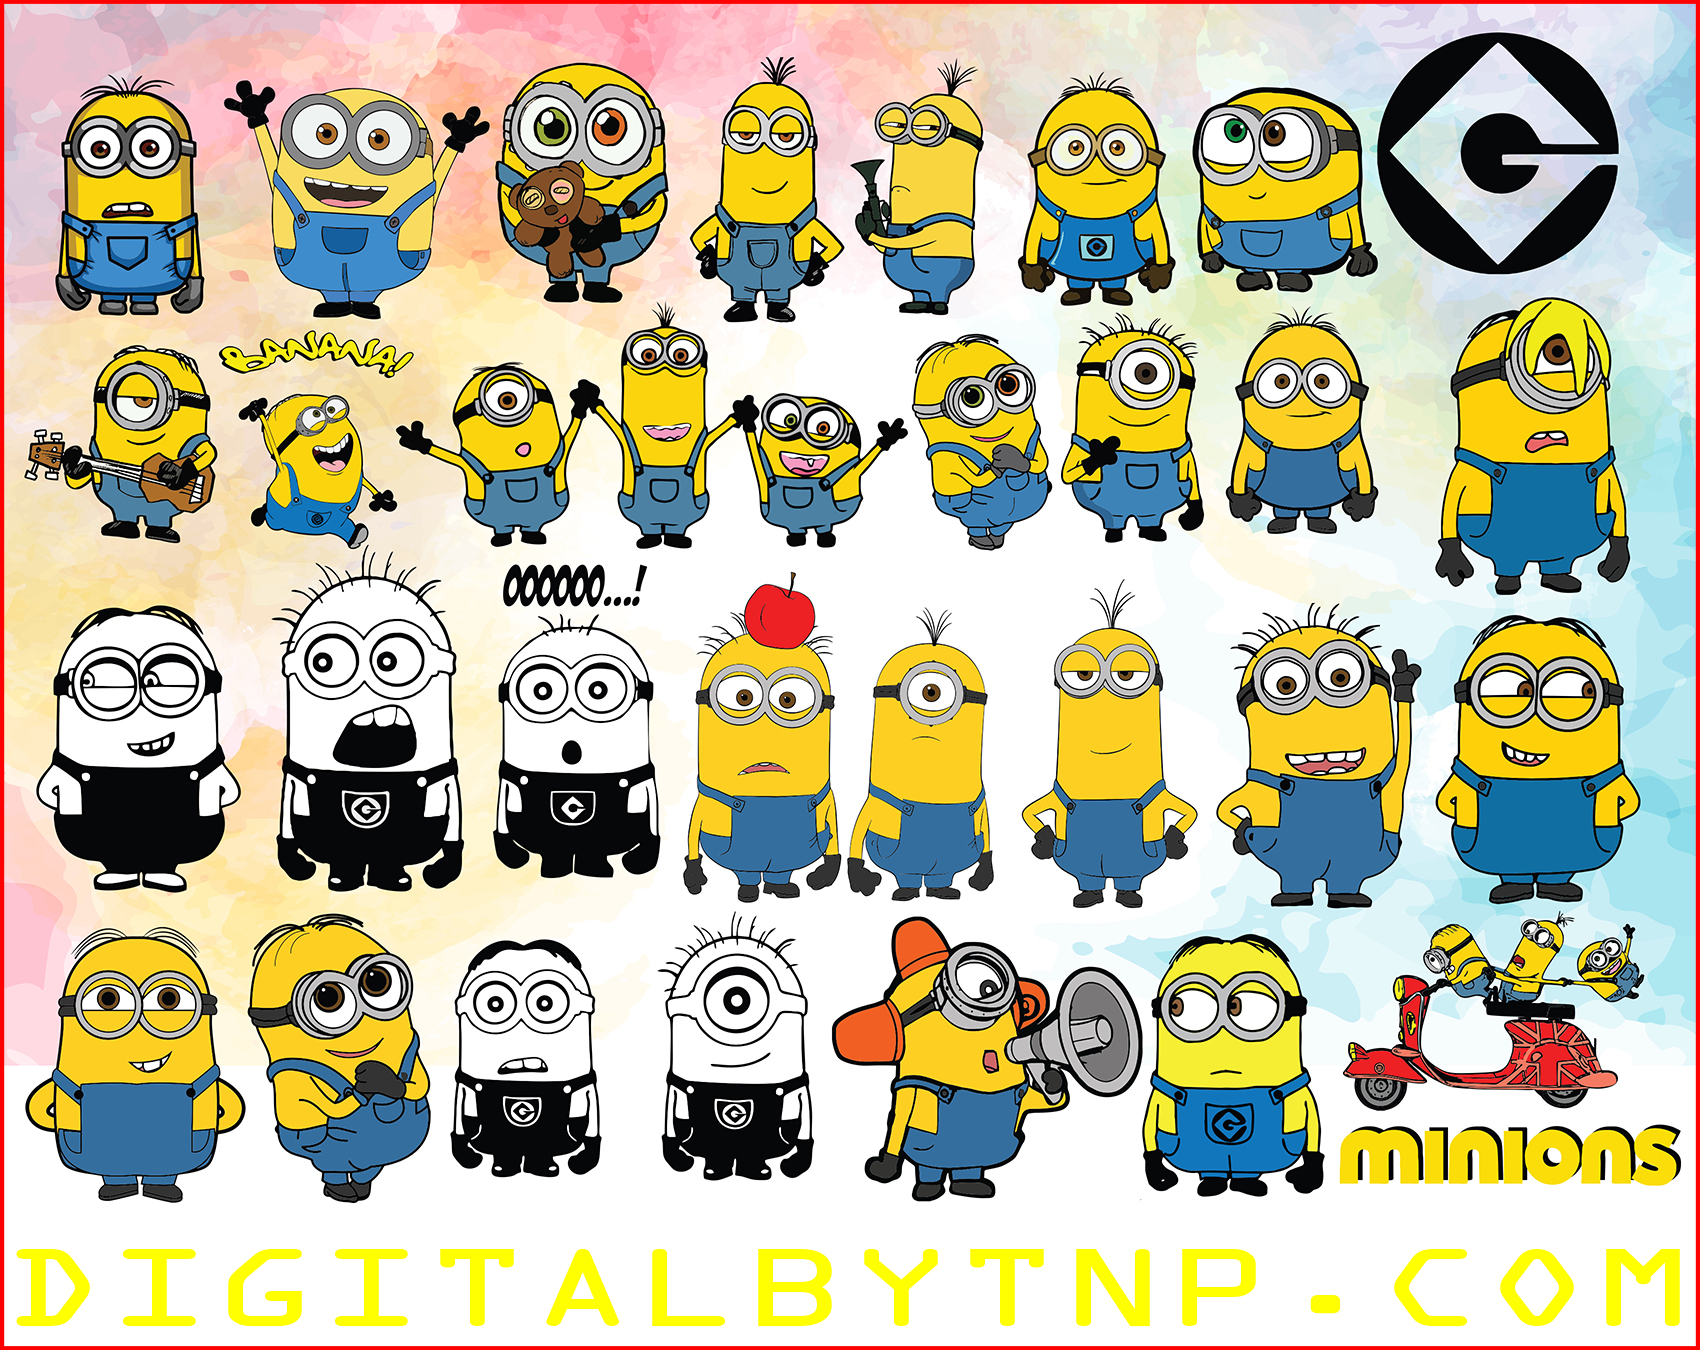 Download A Sale Minions Svg Disney Svg Disney Bundle Svg Minions Cut File Minions Clip Art Minions Vector Minions Layered Despicable Me Svg Files For Silhouette Cameo Cricut Customer Satisfaction Is Our SVG Cut Files